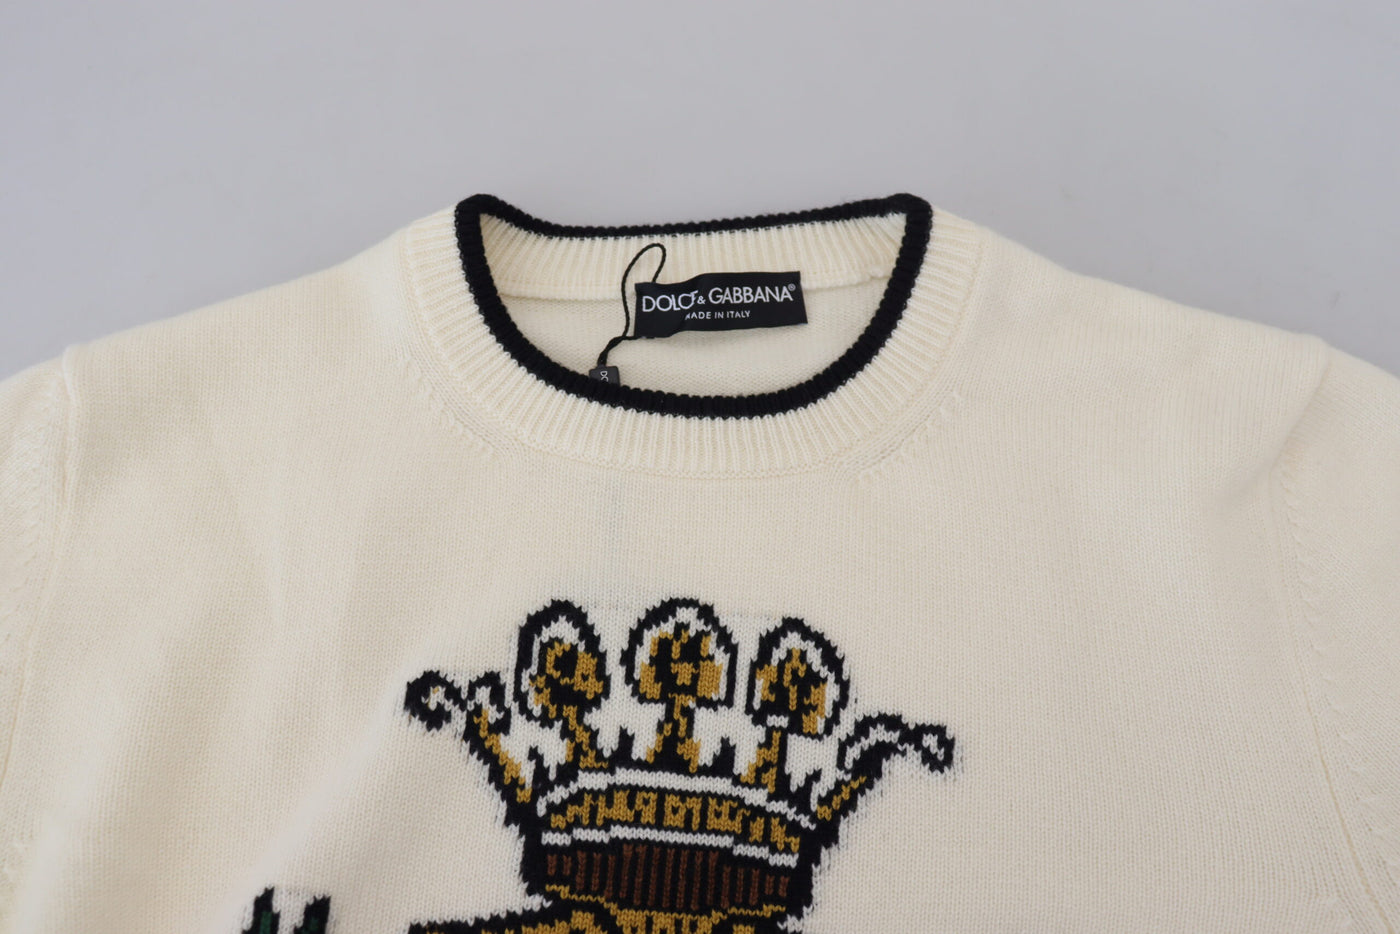 White Henry VIII Cashmere Pullover Sweater